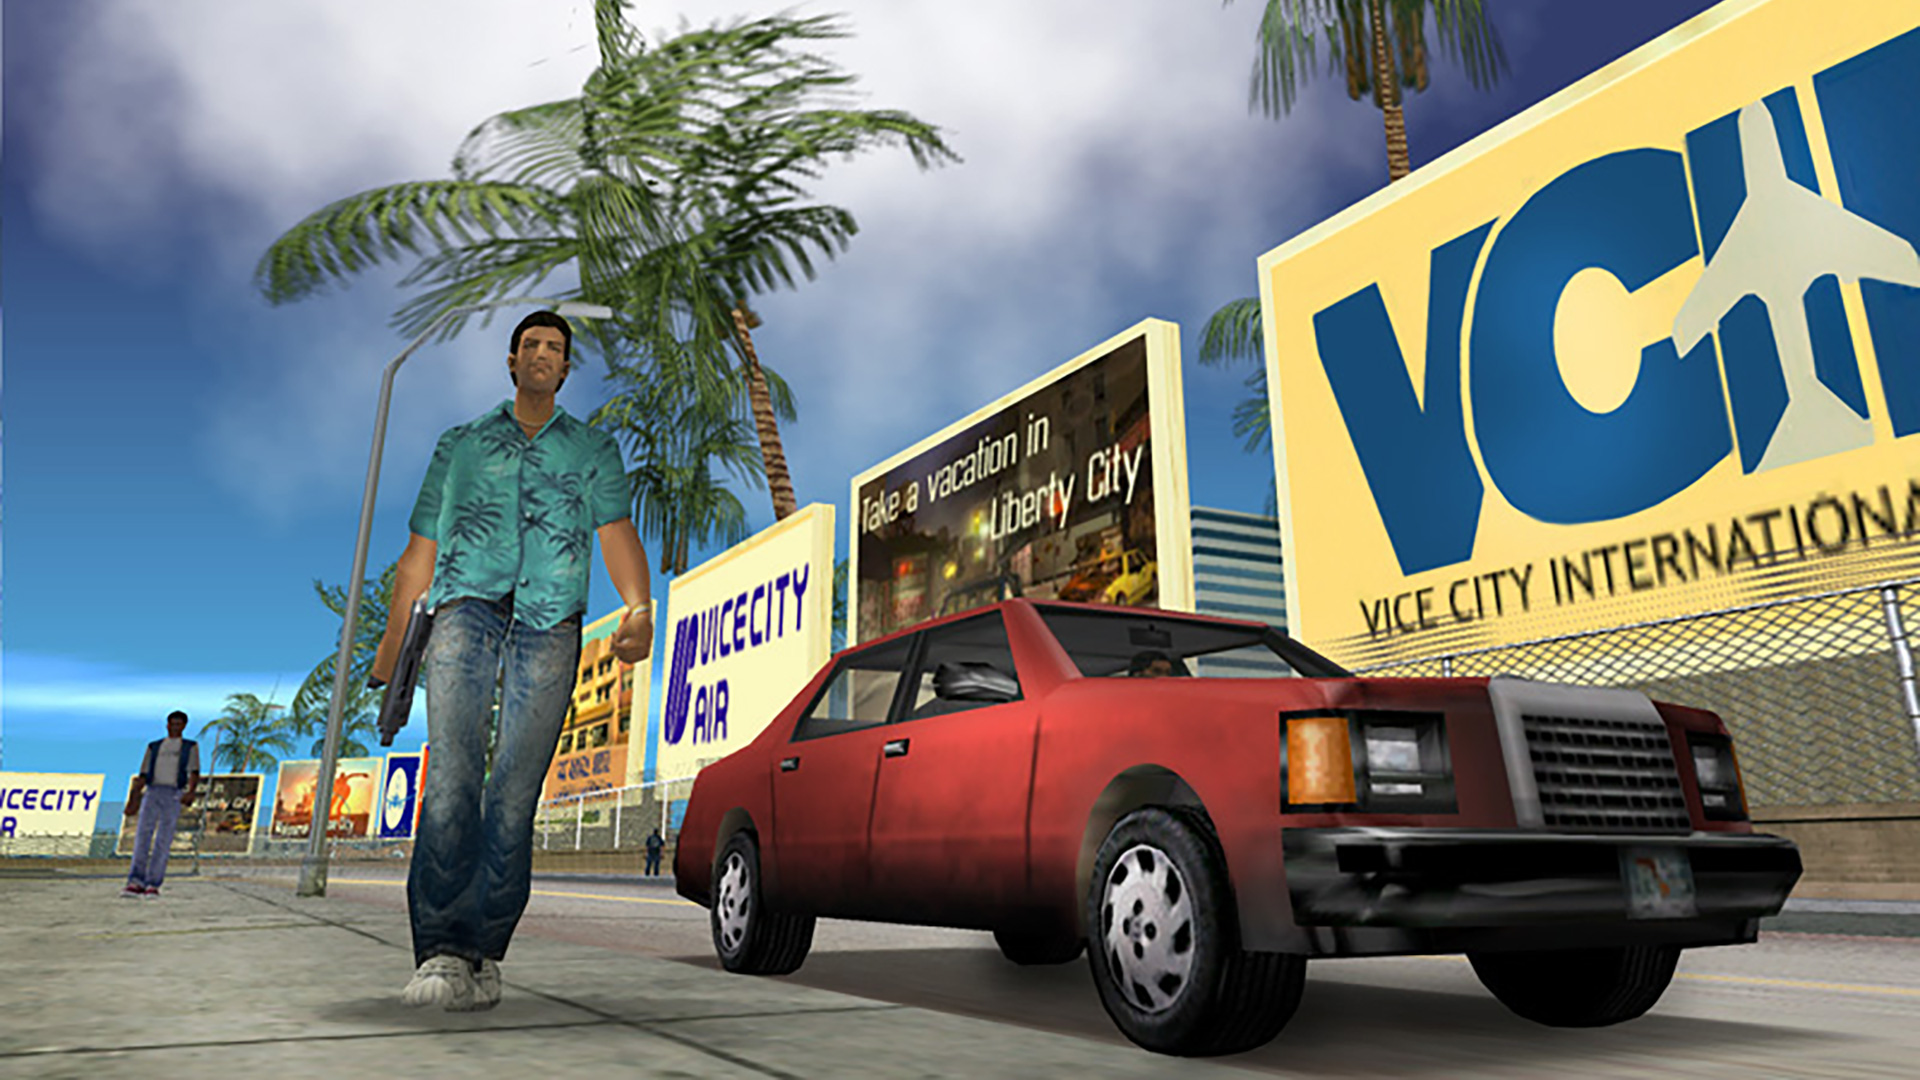 With GTA 6 taking us back to Miami, here’s how the original GTA Vice City came to lifeLatest